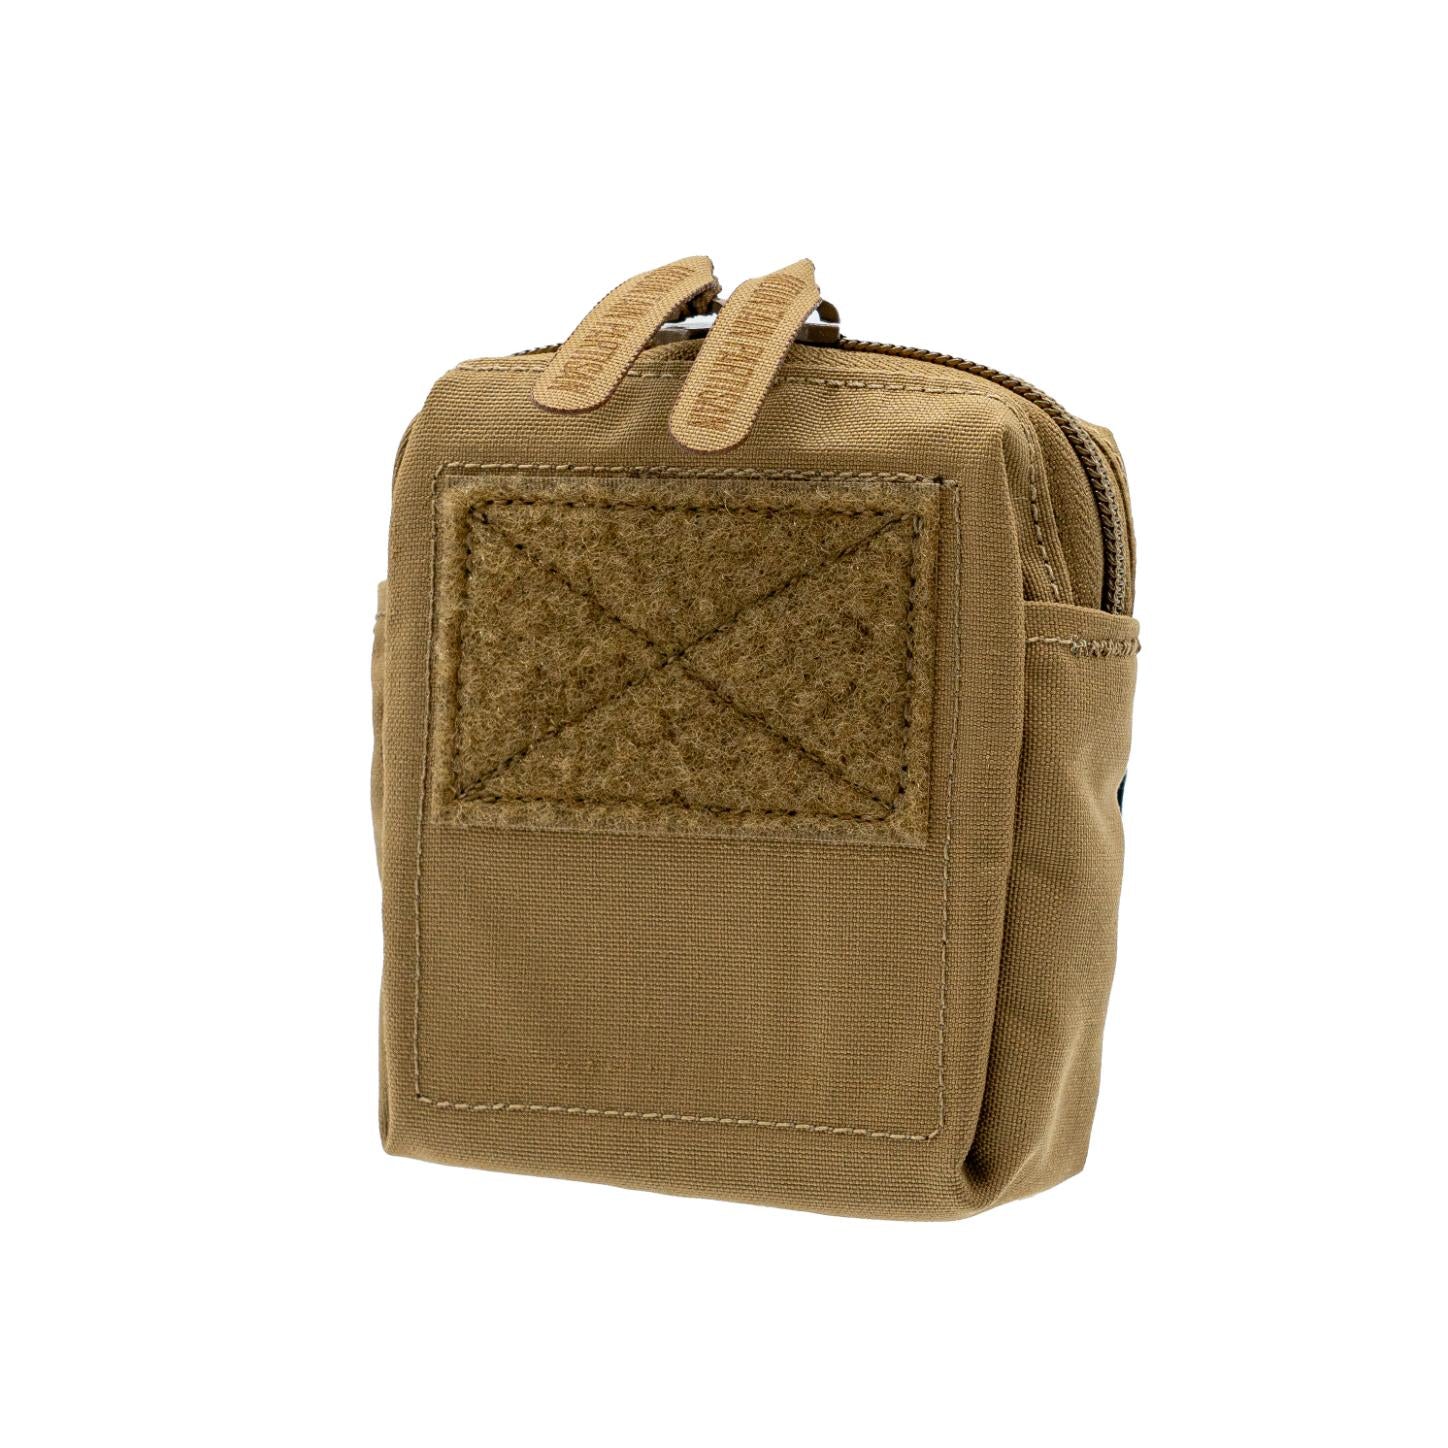 Partisan GP Pouch - Small